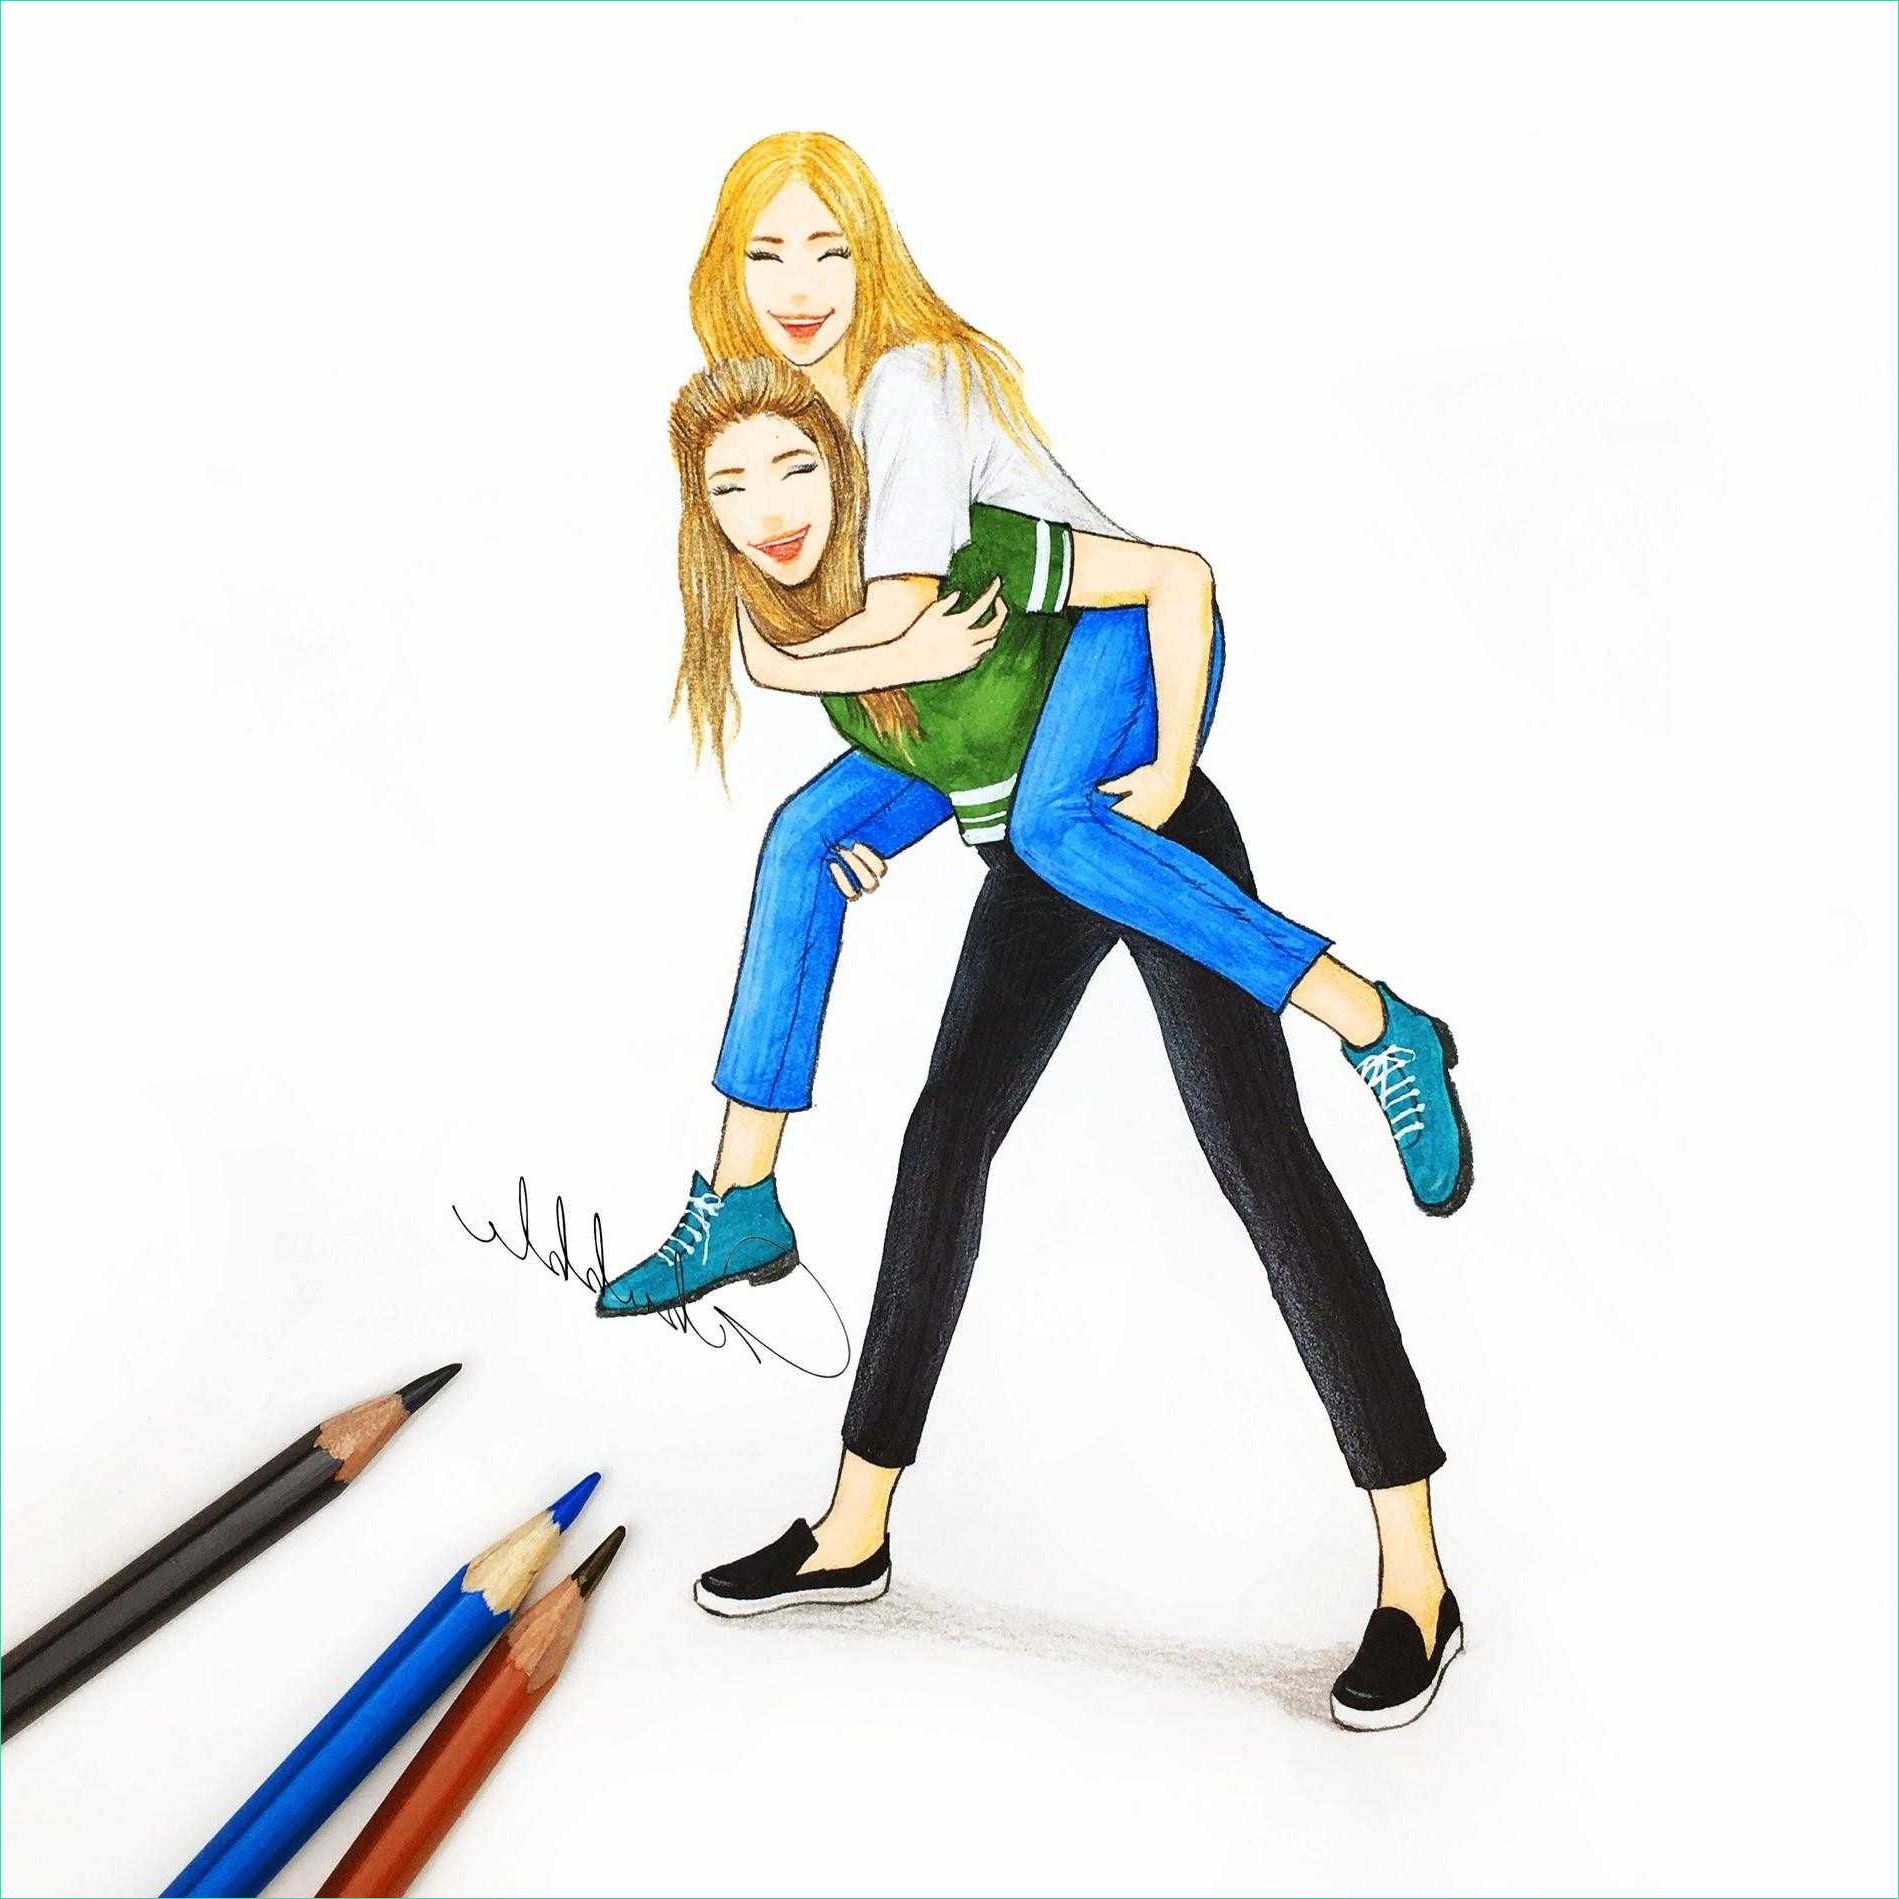 Best Friend Dessin Inspirant Image Image Result for Bff Drawings